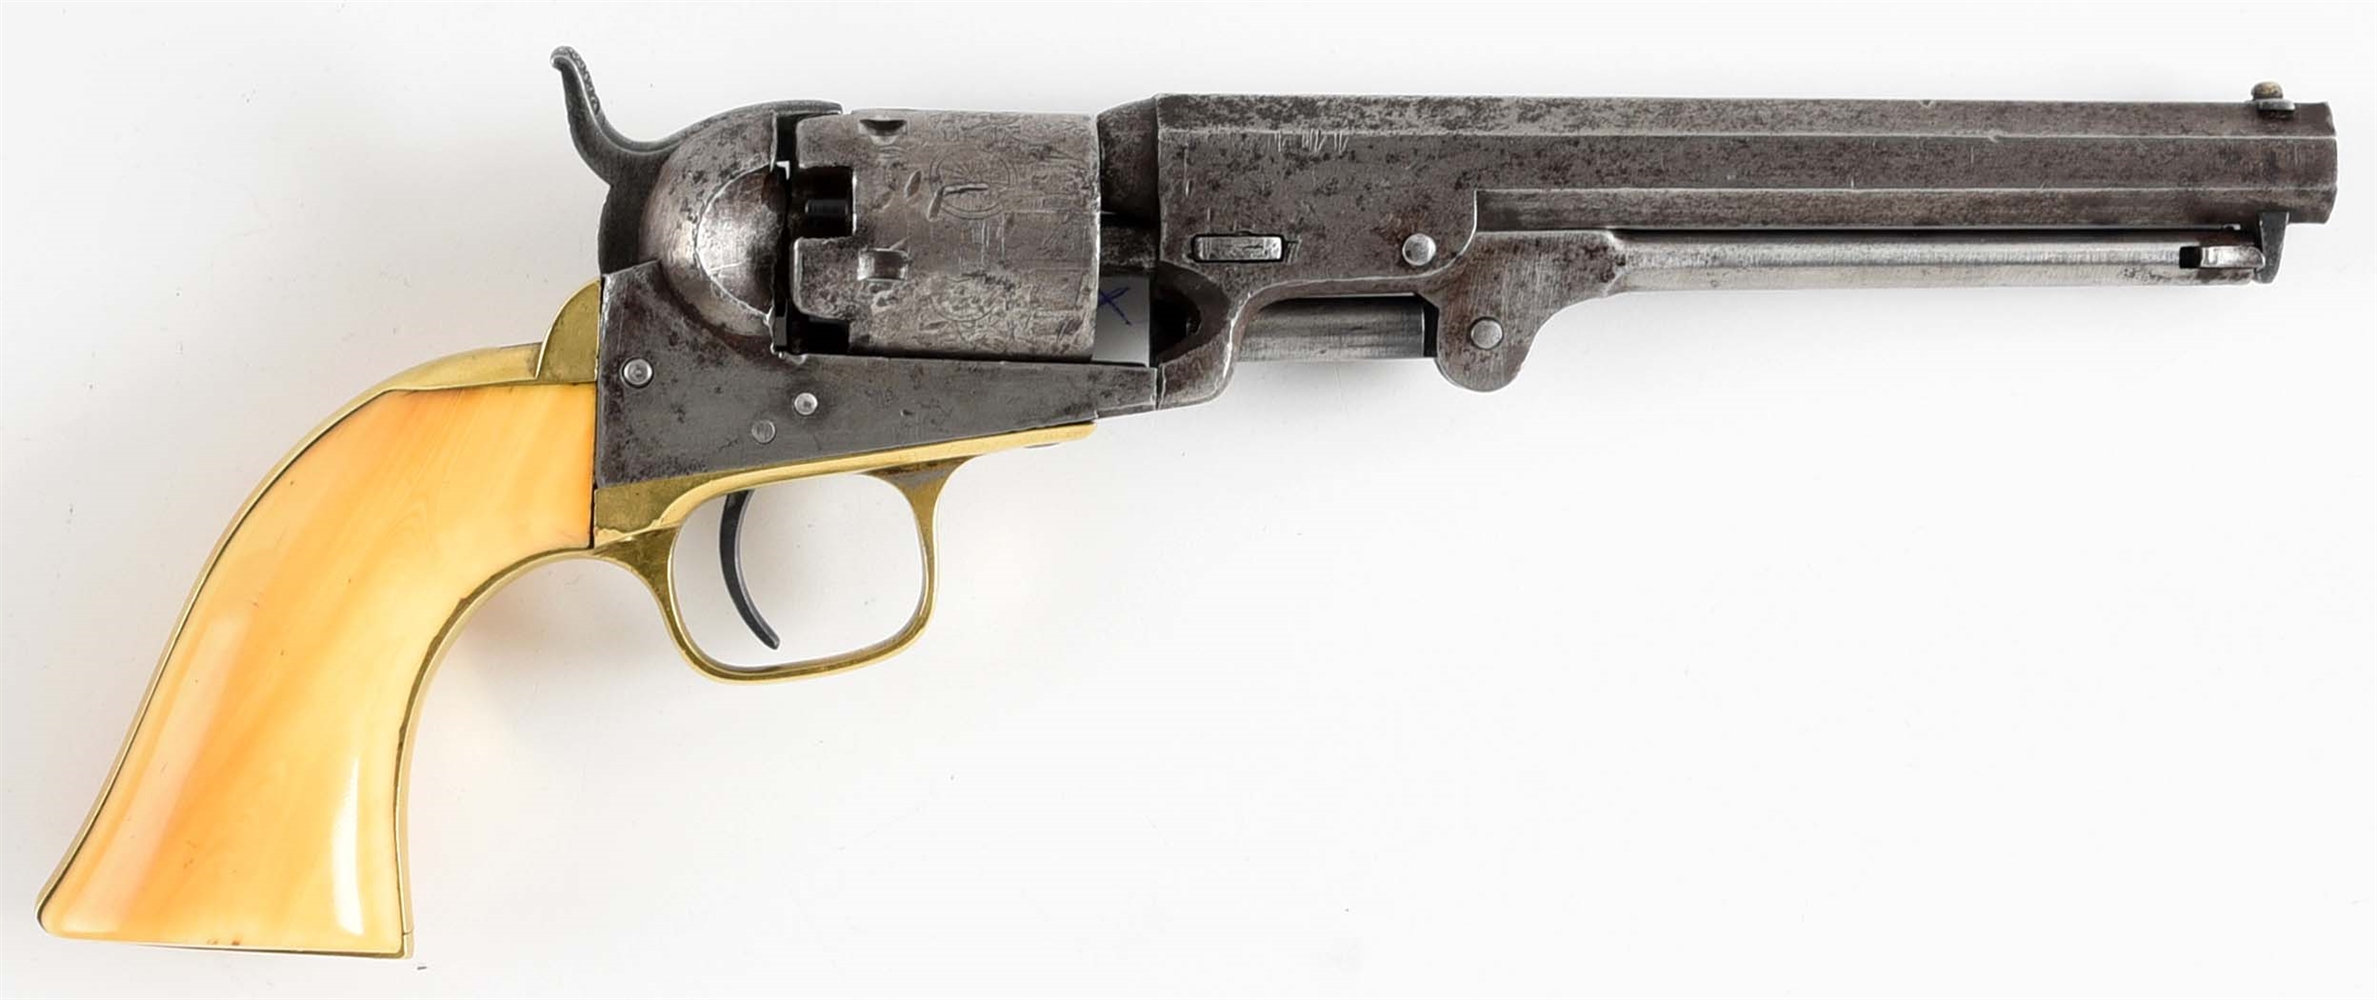 (A) COLT MODEL 1849 POCKET SINGLE ACTION PERCUSSION REVOLVER WITH IVORY GRIPS IN A CONTEMPORARY CASE (1860).